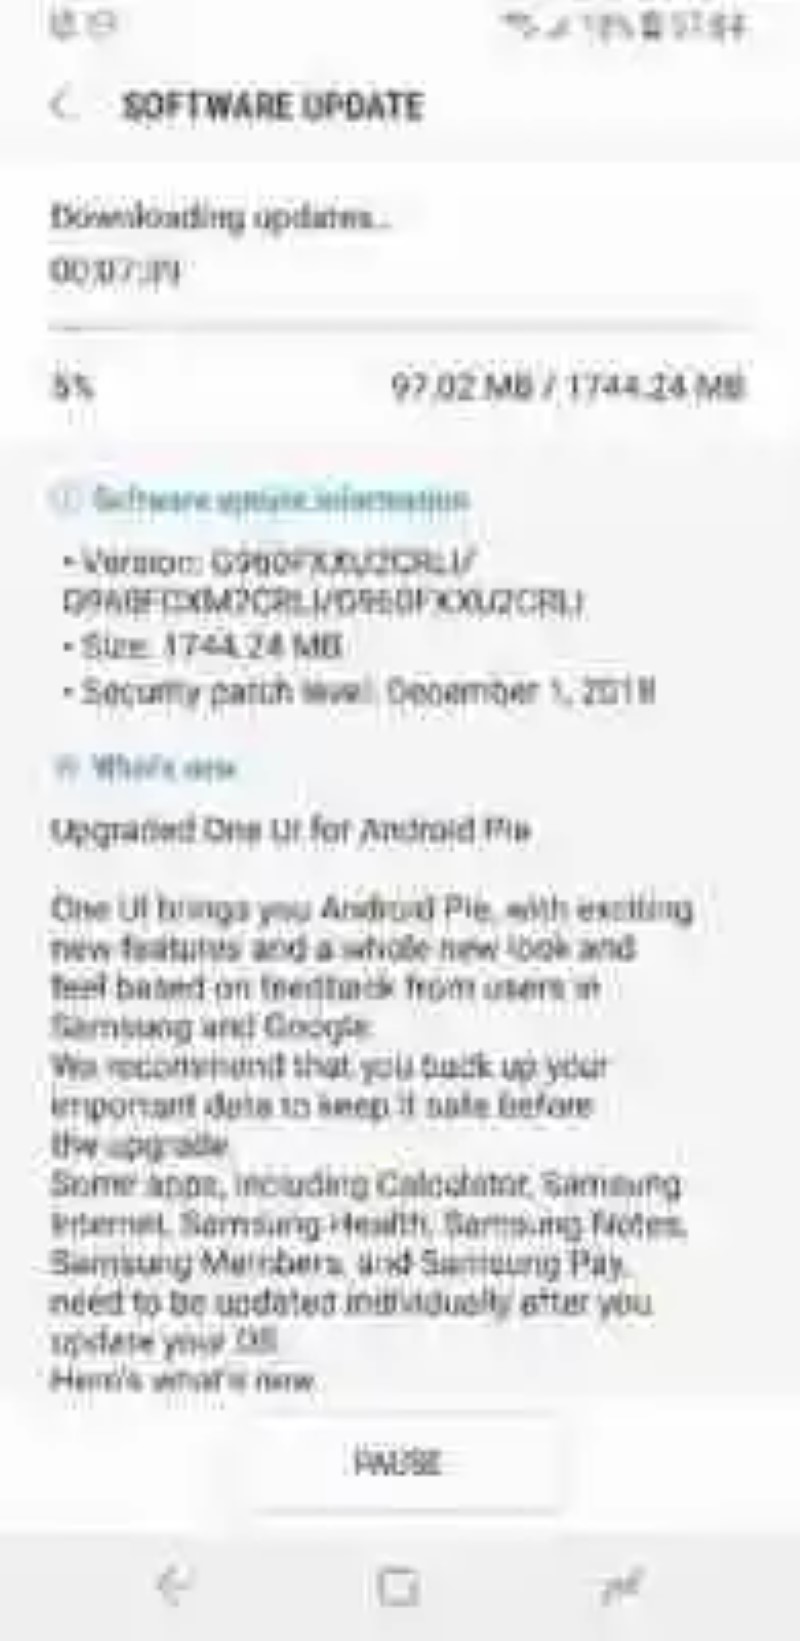 The Samsung Galaxy S9 are already receiving the update to Android 9.0 Foot with the new One UI